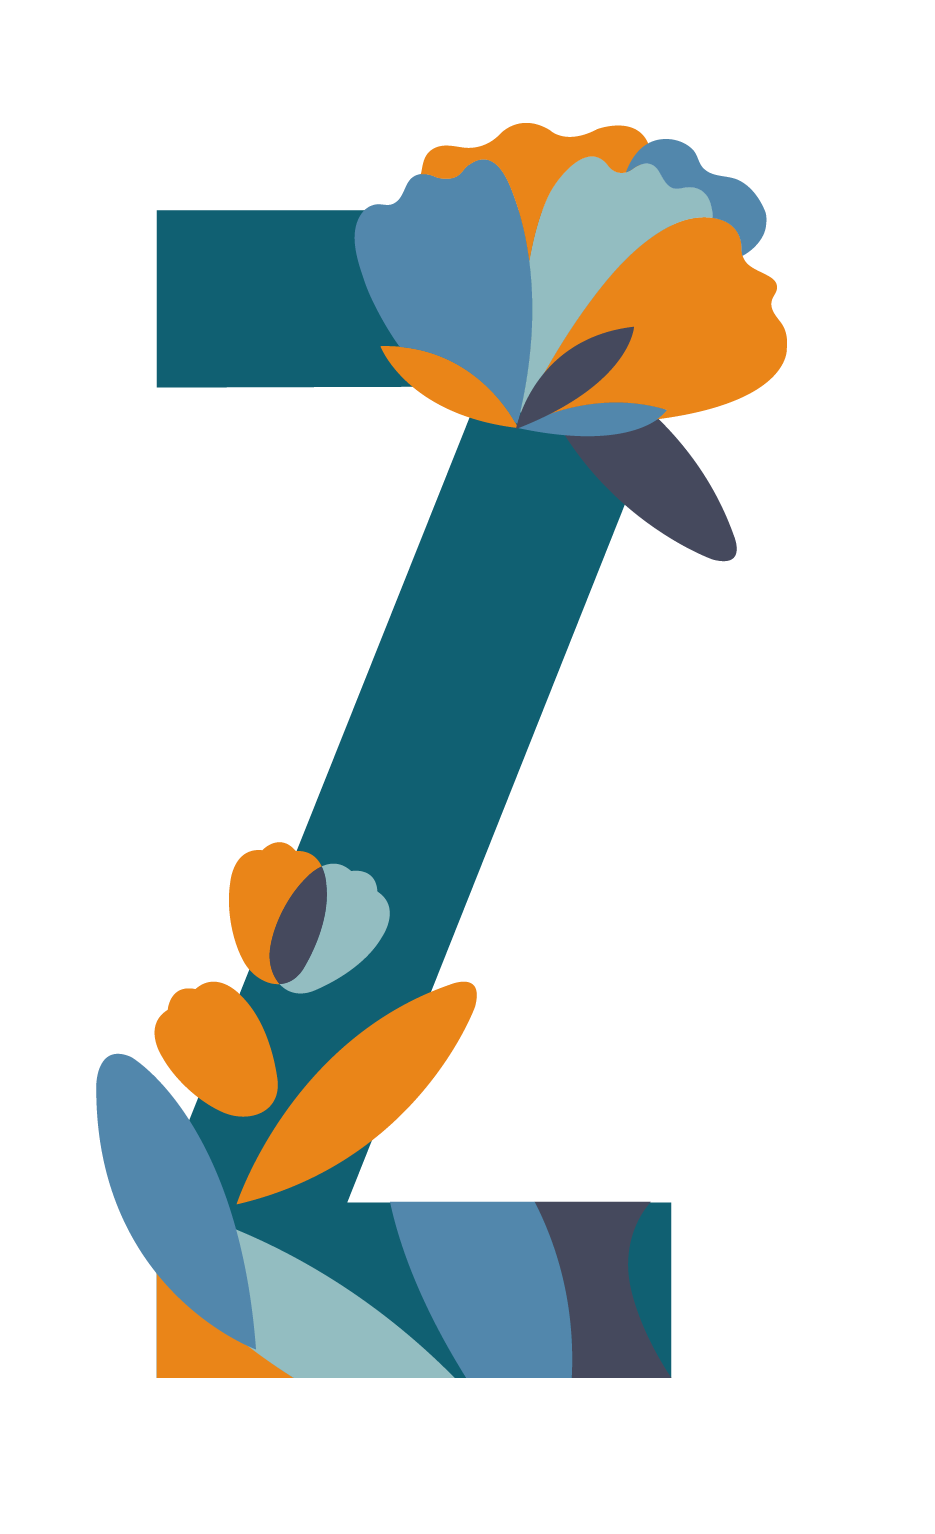 Z Letter PNG HD and HQ Image